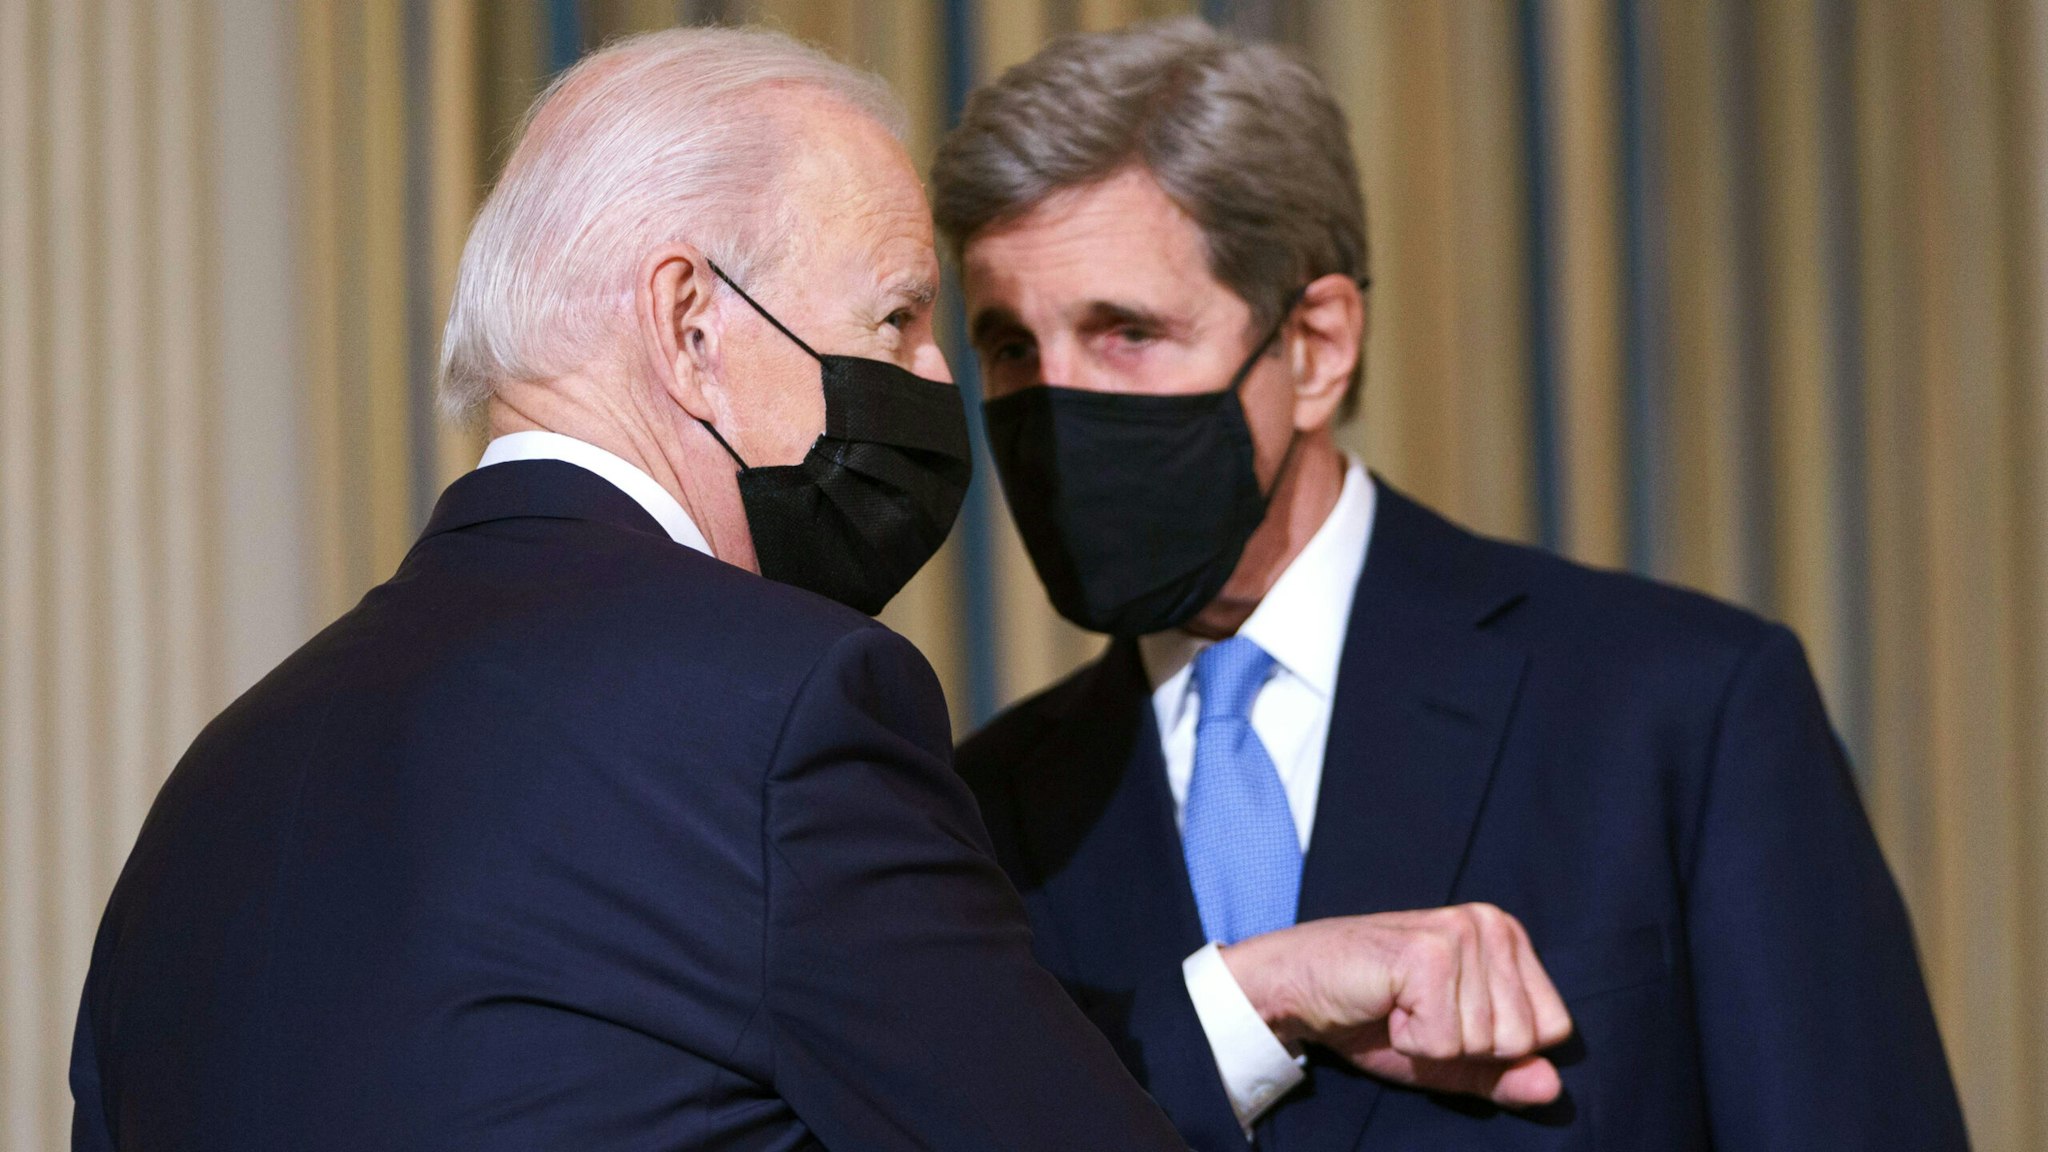 TOPSHOT - US President Joe Biden greets Special Presidential Envoy for Climate John Kerry as he arrives to speak on climate change before signing executive orders in the State Dining Room of the White House in Washington, DC on January 27, 2021.